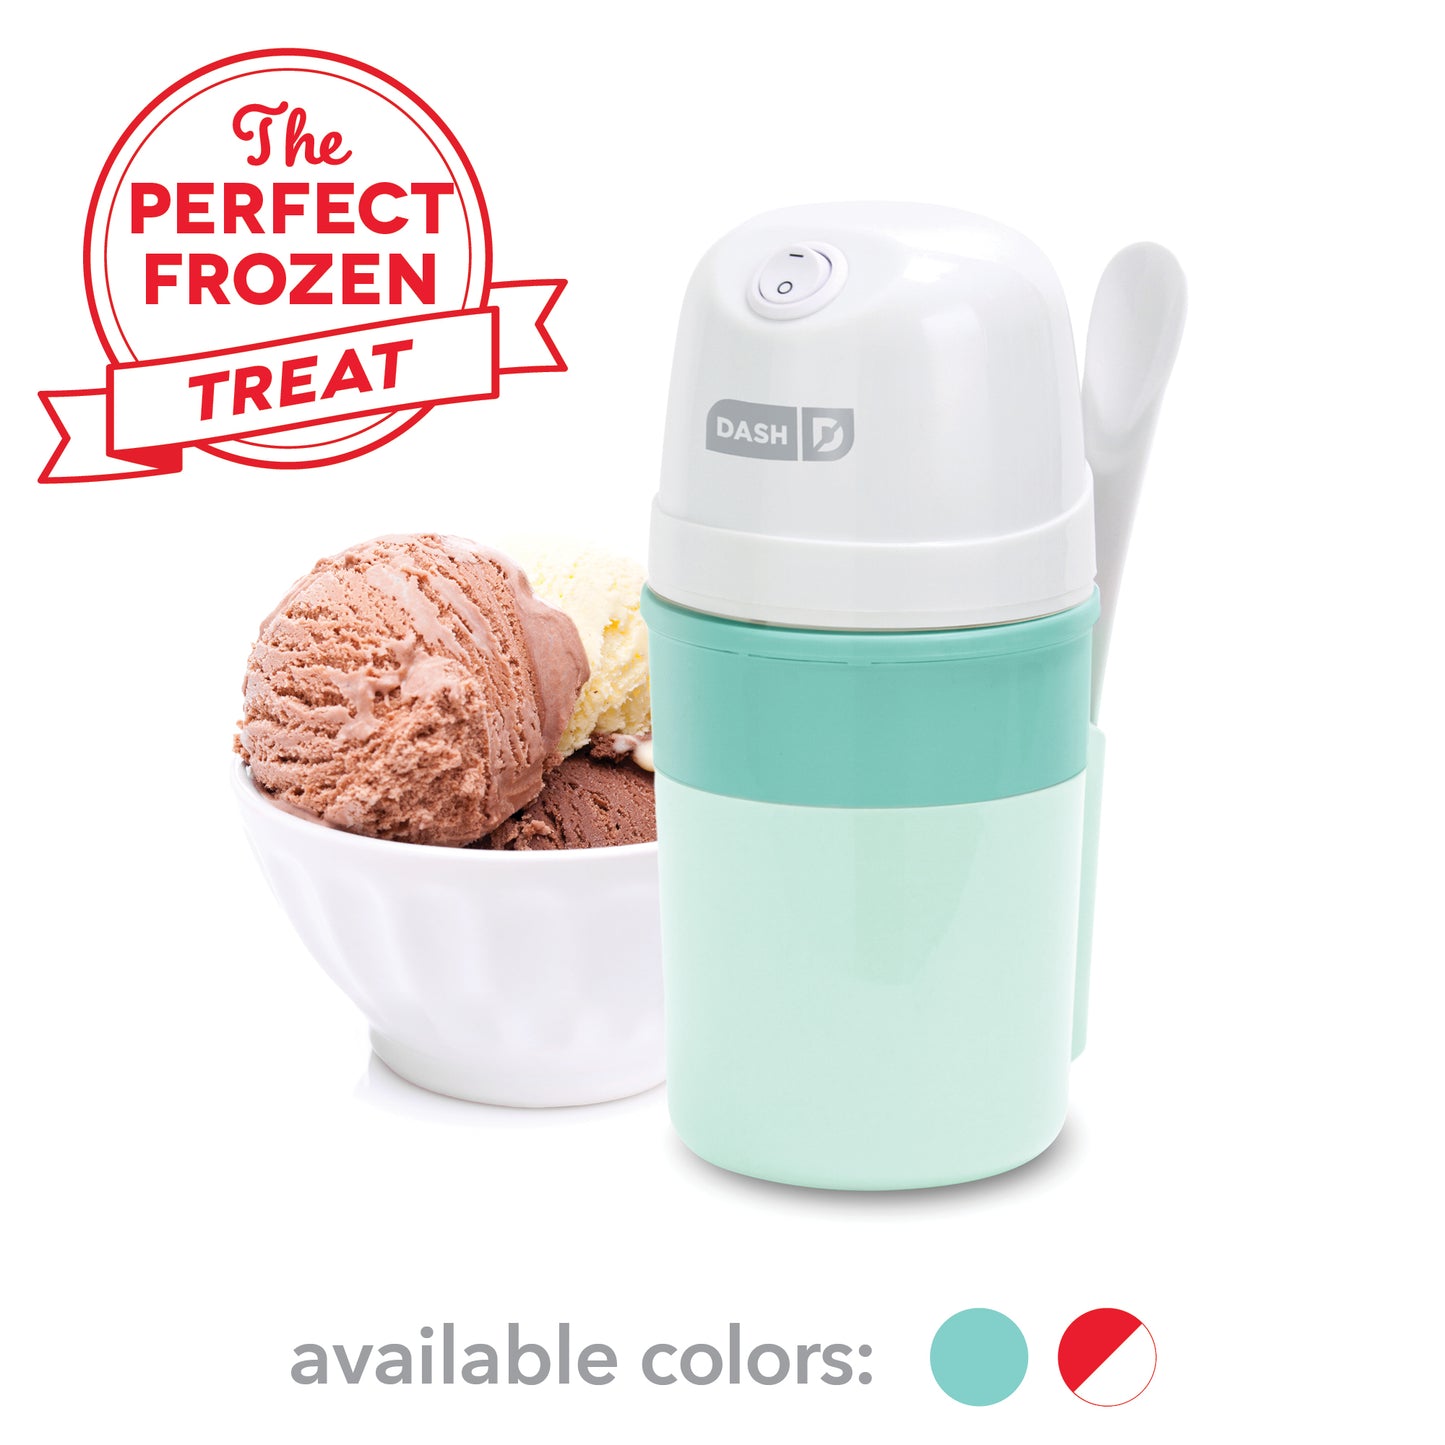 Ice Cream Maker: Pint Size & Free Book 2015 from MindWare